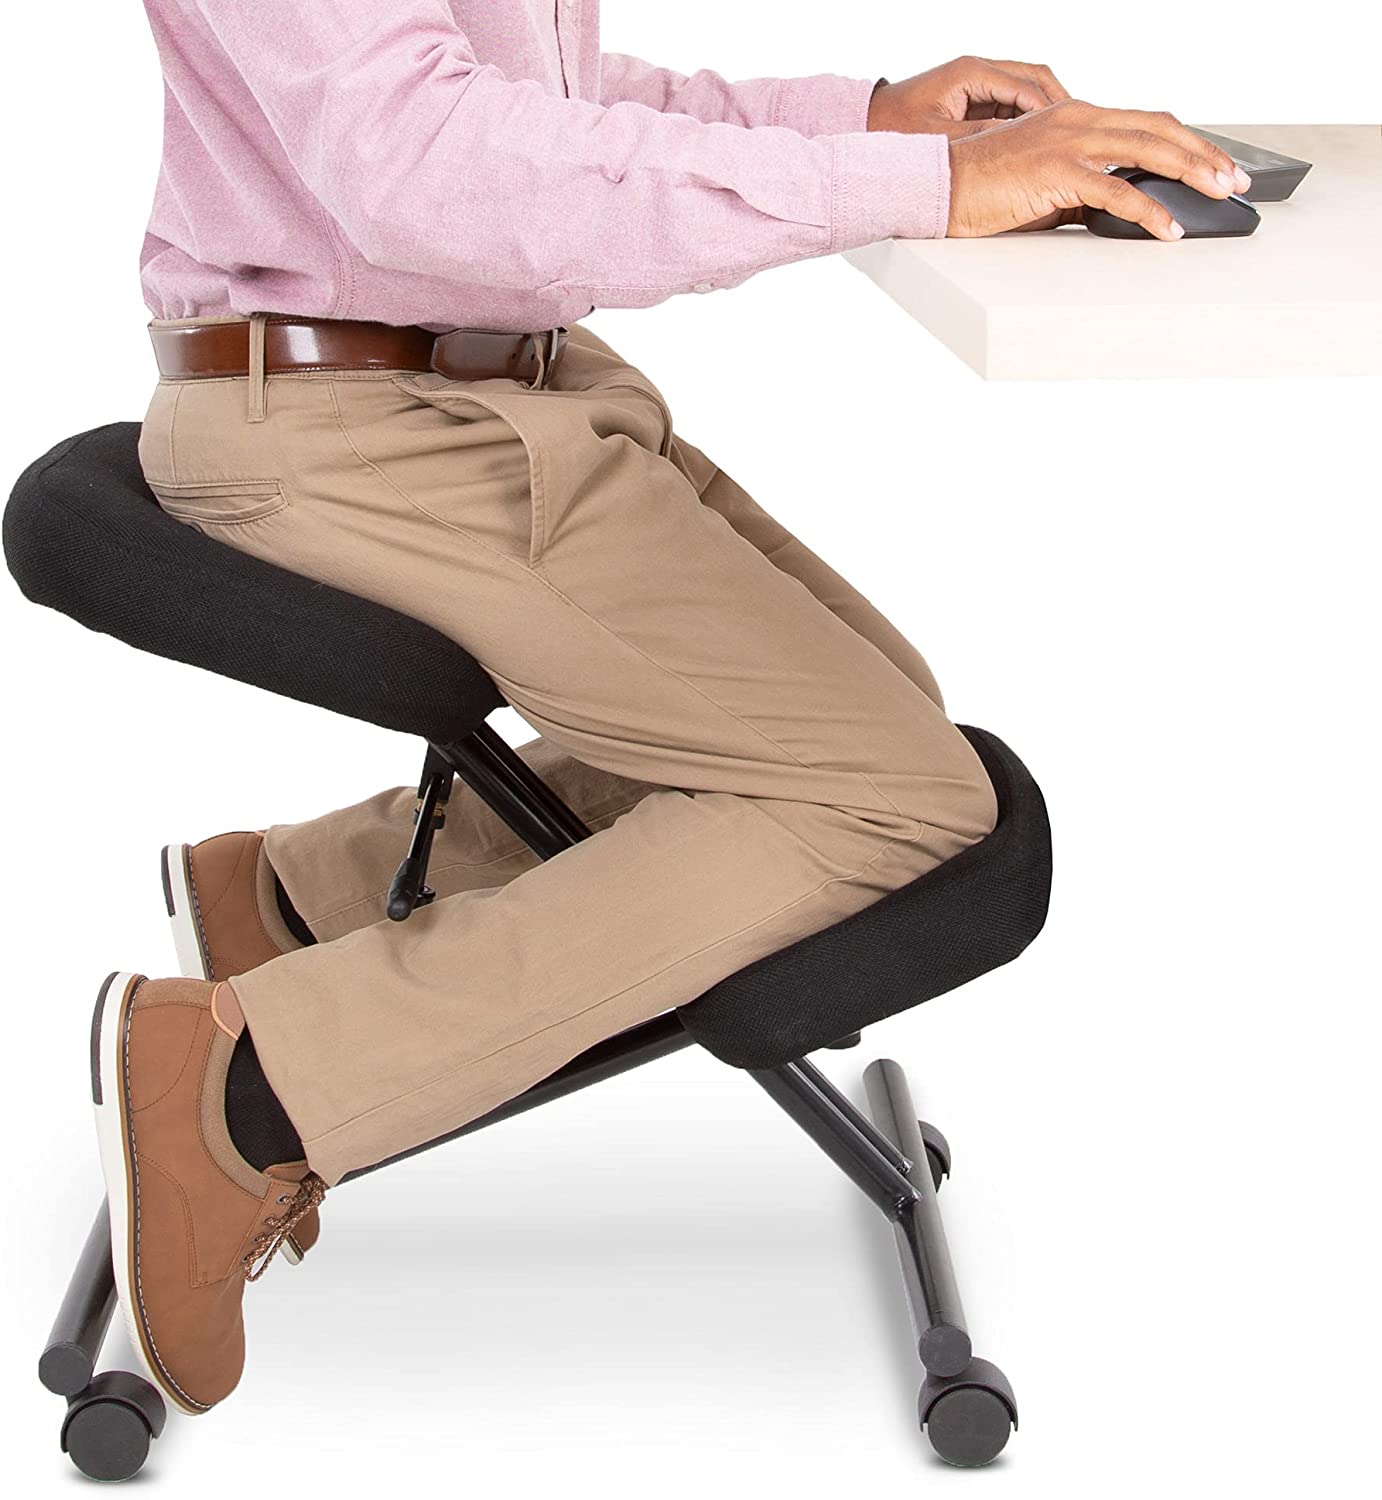 Stand Steady ProErgo Cushioned Kneeling Desk Office Chair